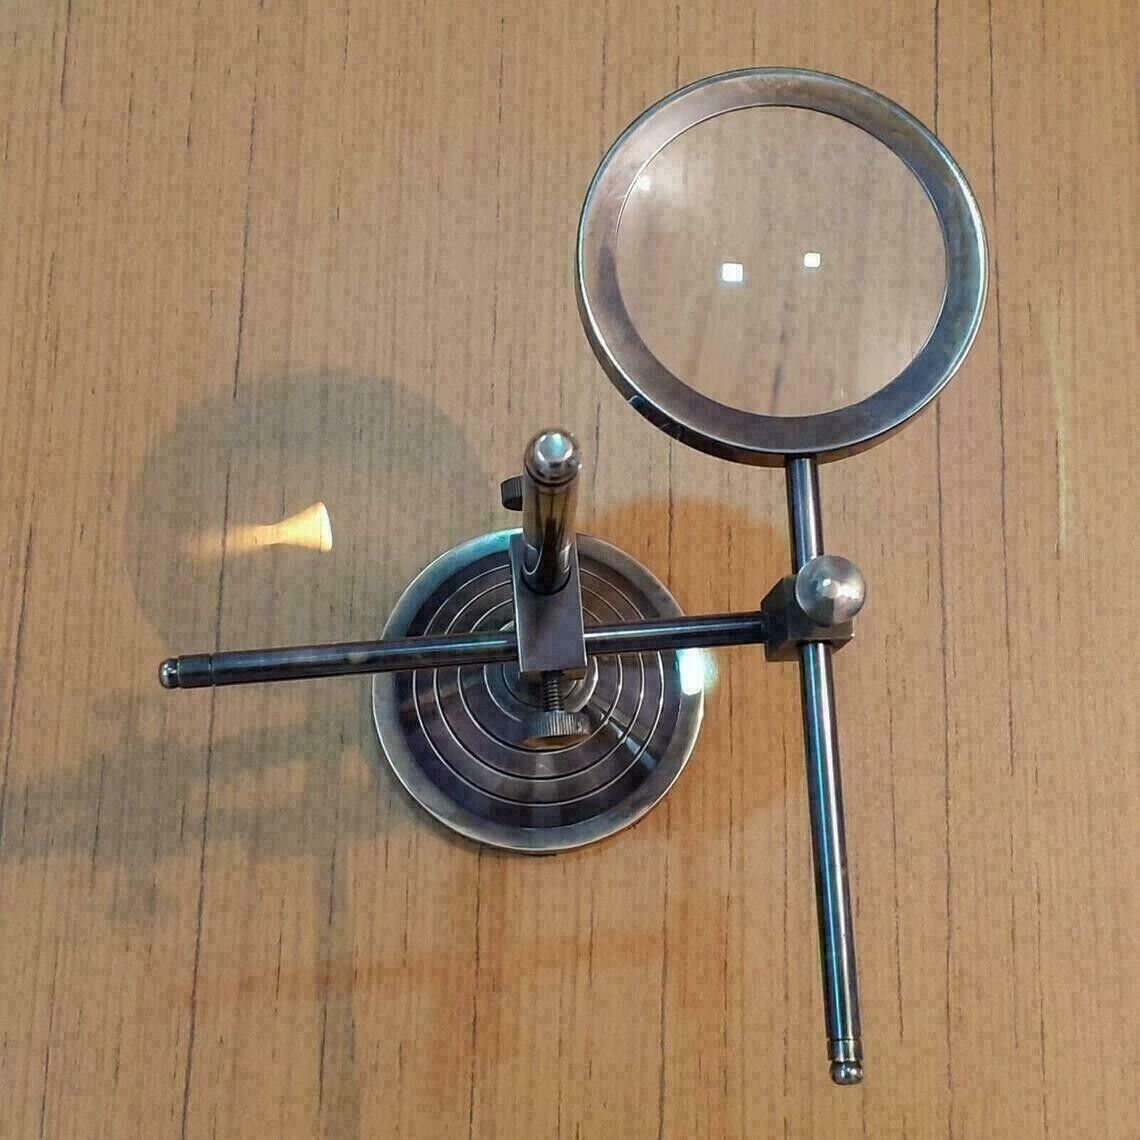 TABLE TOP MAGNIFYING GLASS DESK BRASS MAGNIFIER Antique Nautical Gift